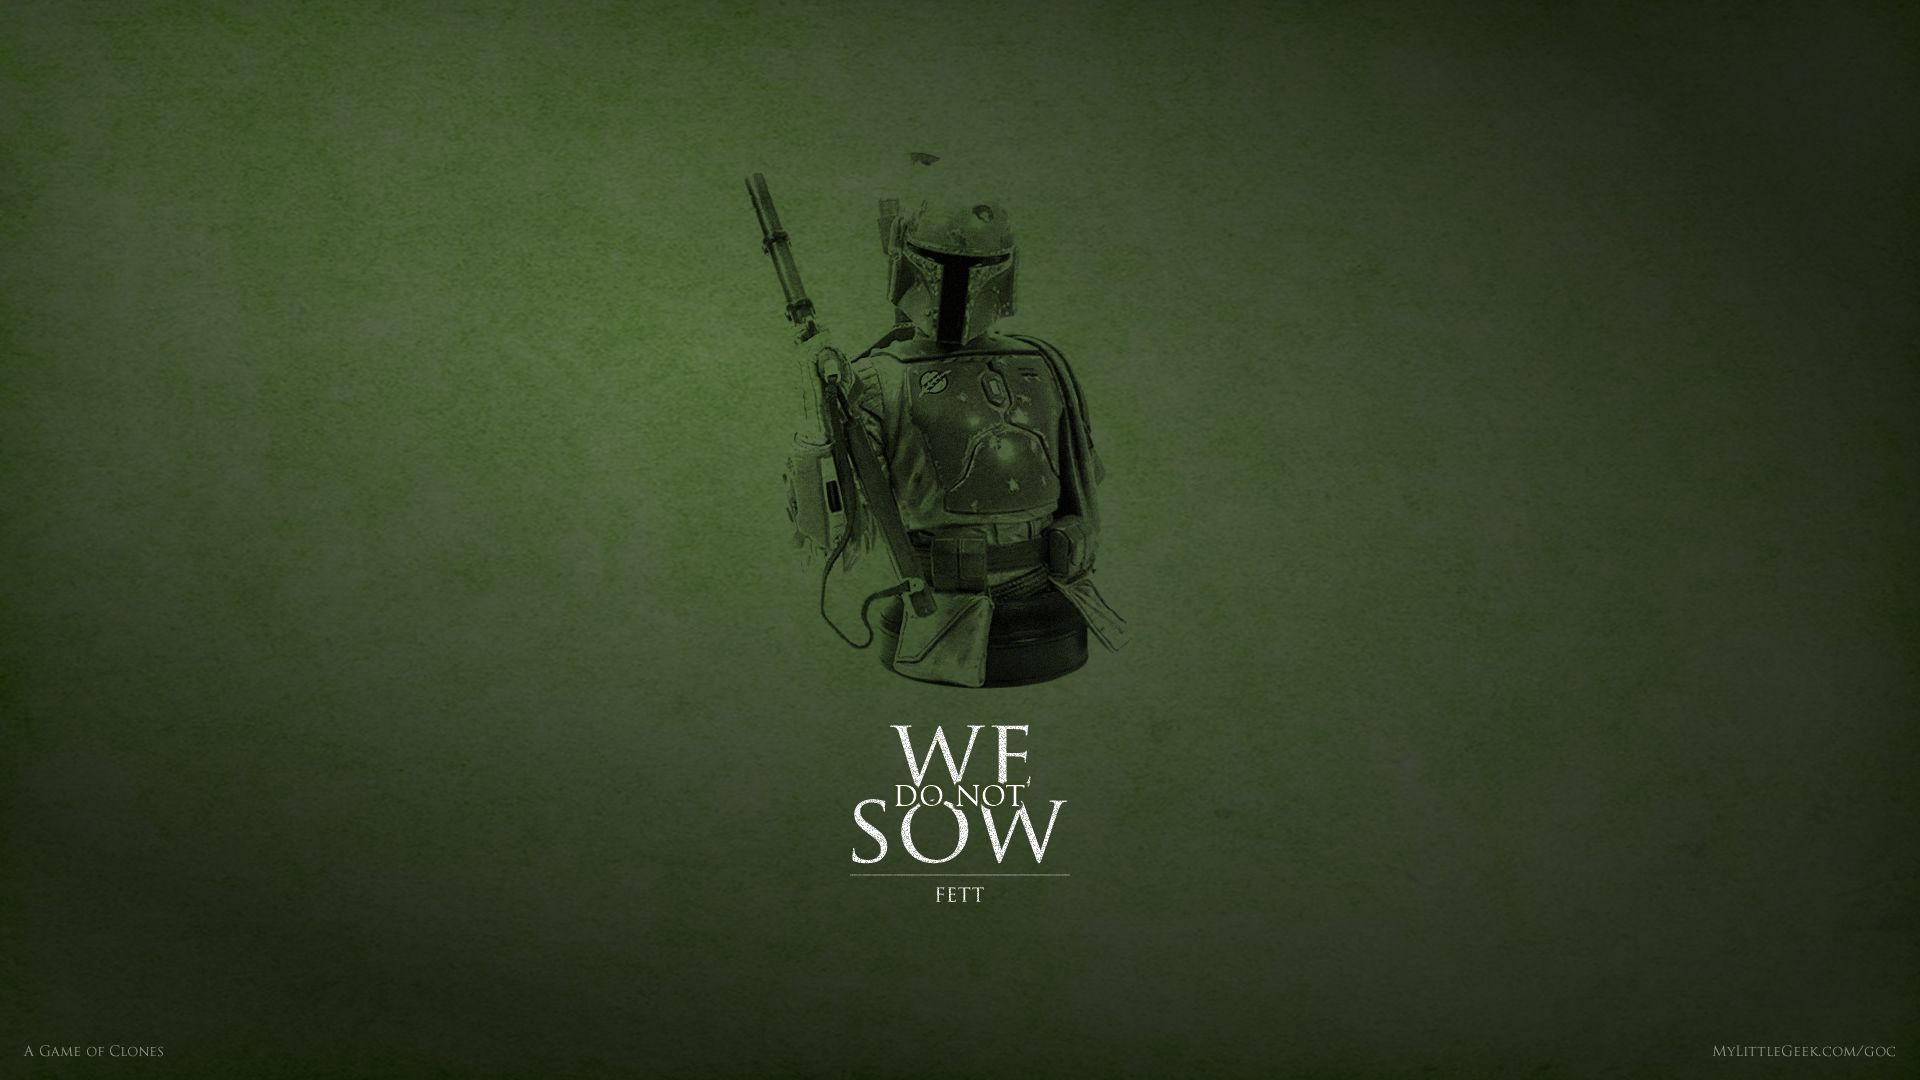 Game of Clones Star Wars Game of Thrones Mashup Wallpapers 1920x1080